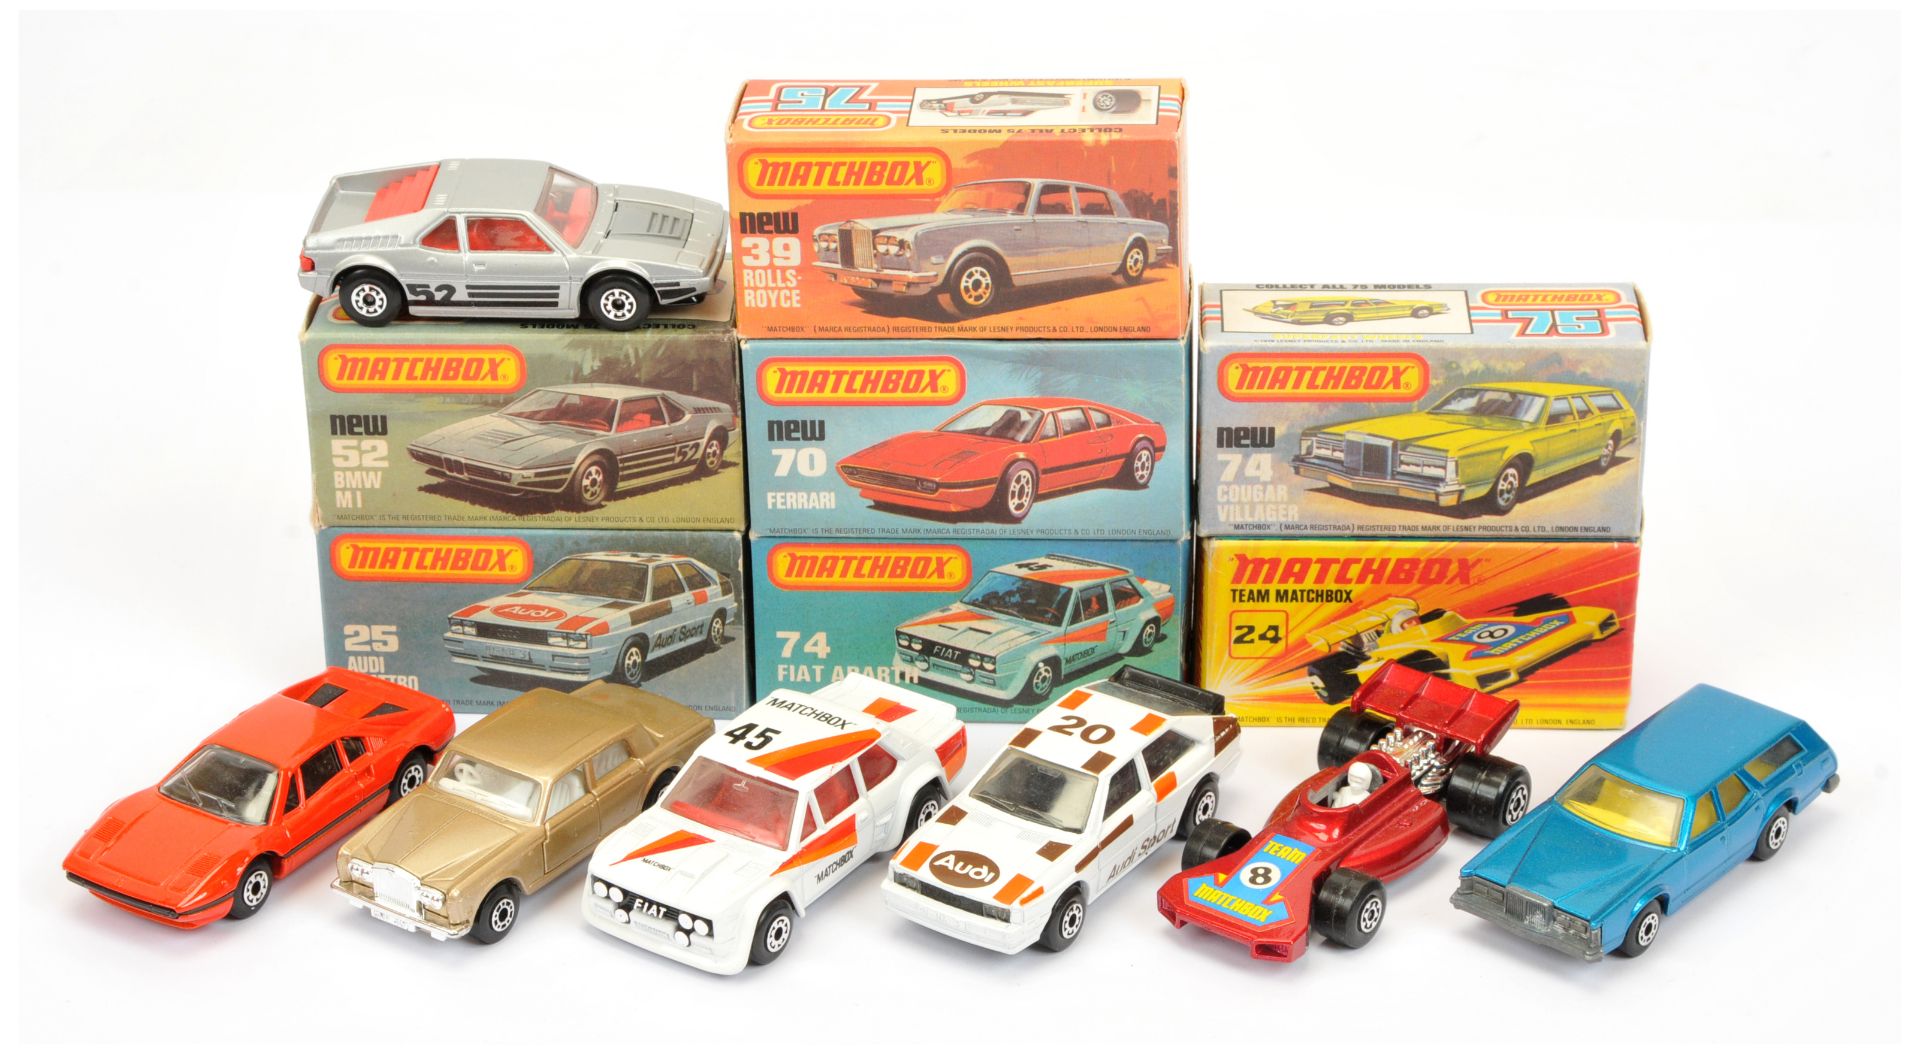 Matchbox Superfast Group Of 7 To Include  - 24b "Team Matchbox" Racing Car - Metallic Red, 52c BM...